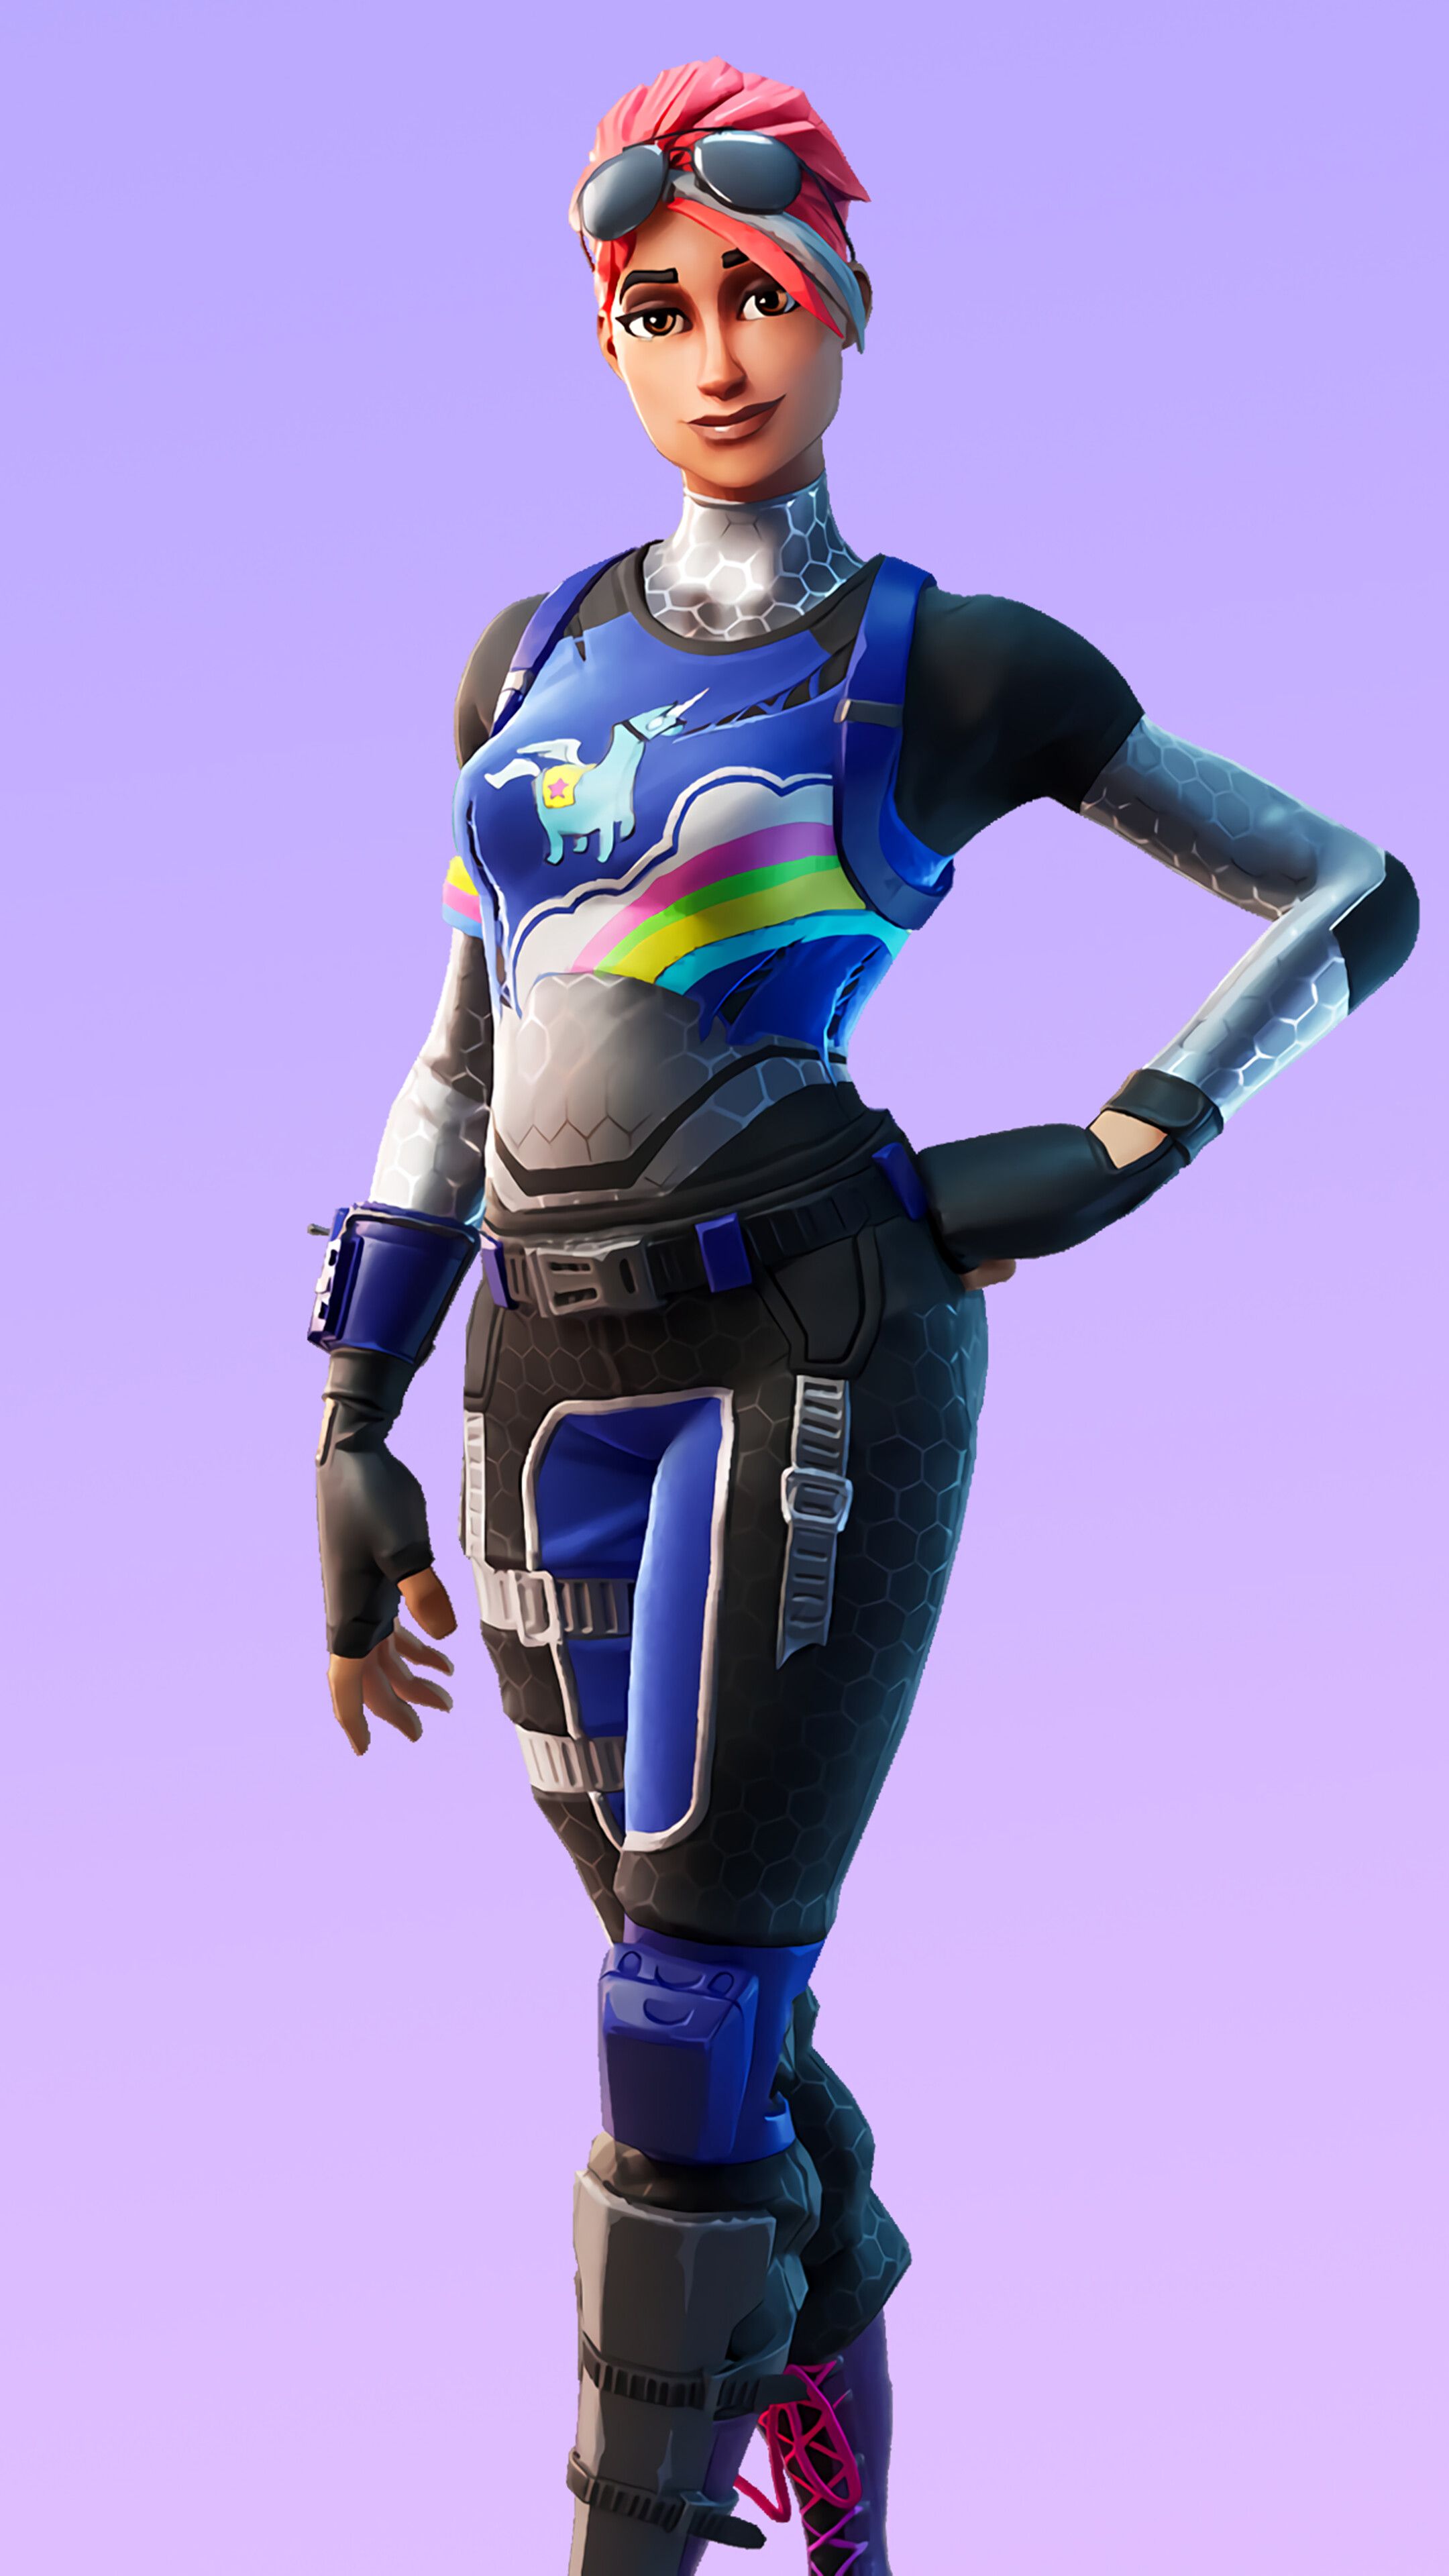 Fortnite, Brilliant Bomber, Skin, Outfit, 4K phone HD Wallpaper, Image, Background, Photo and Picture